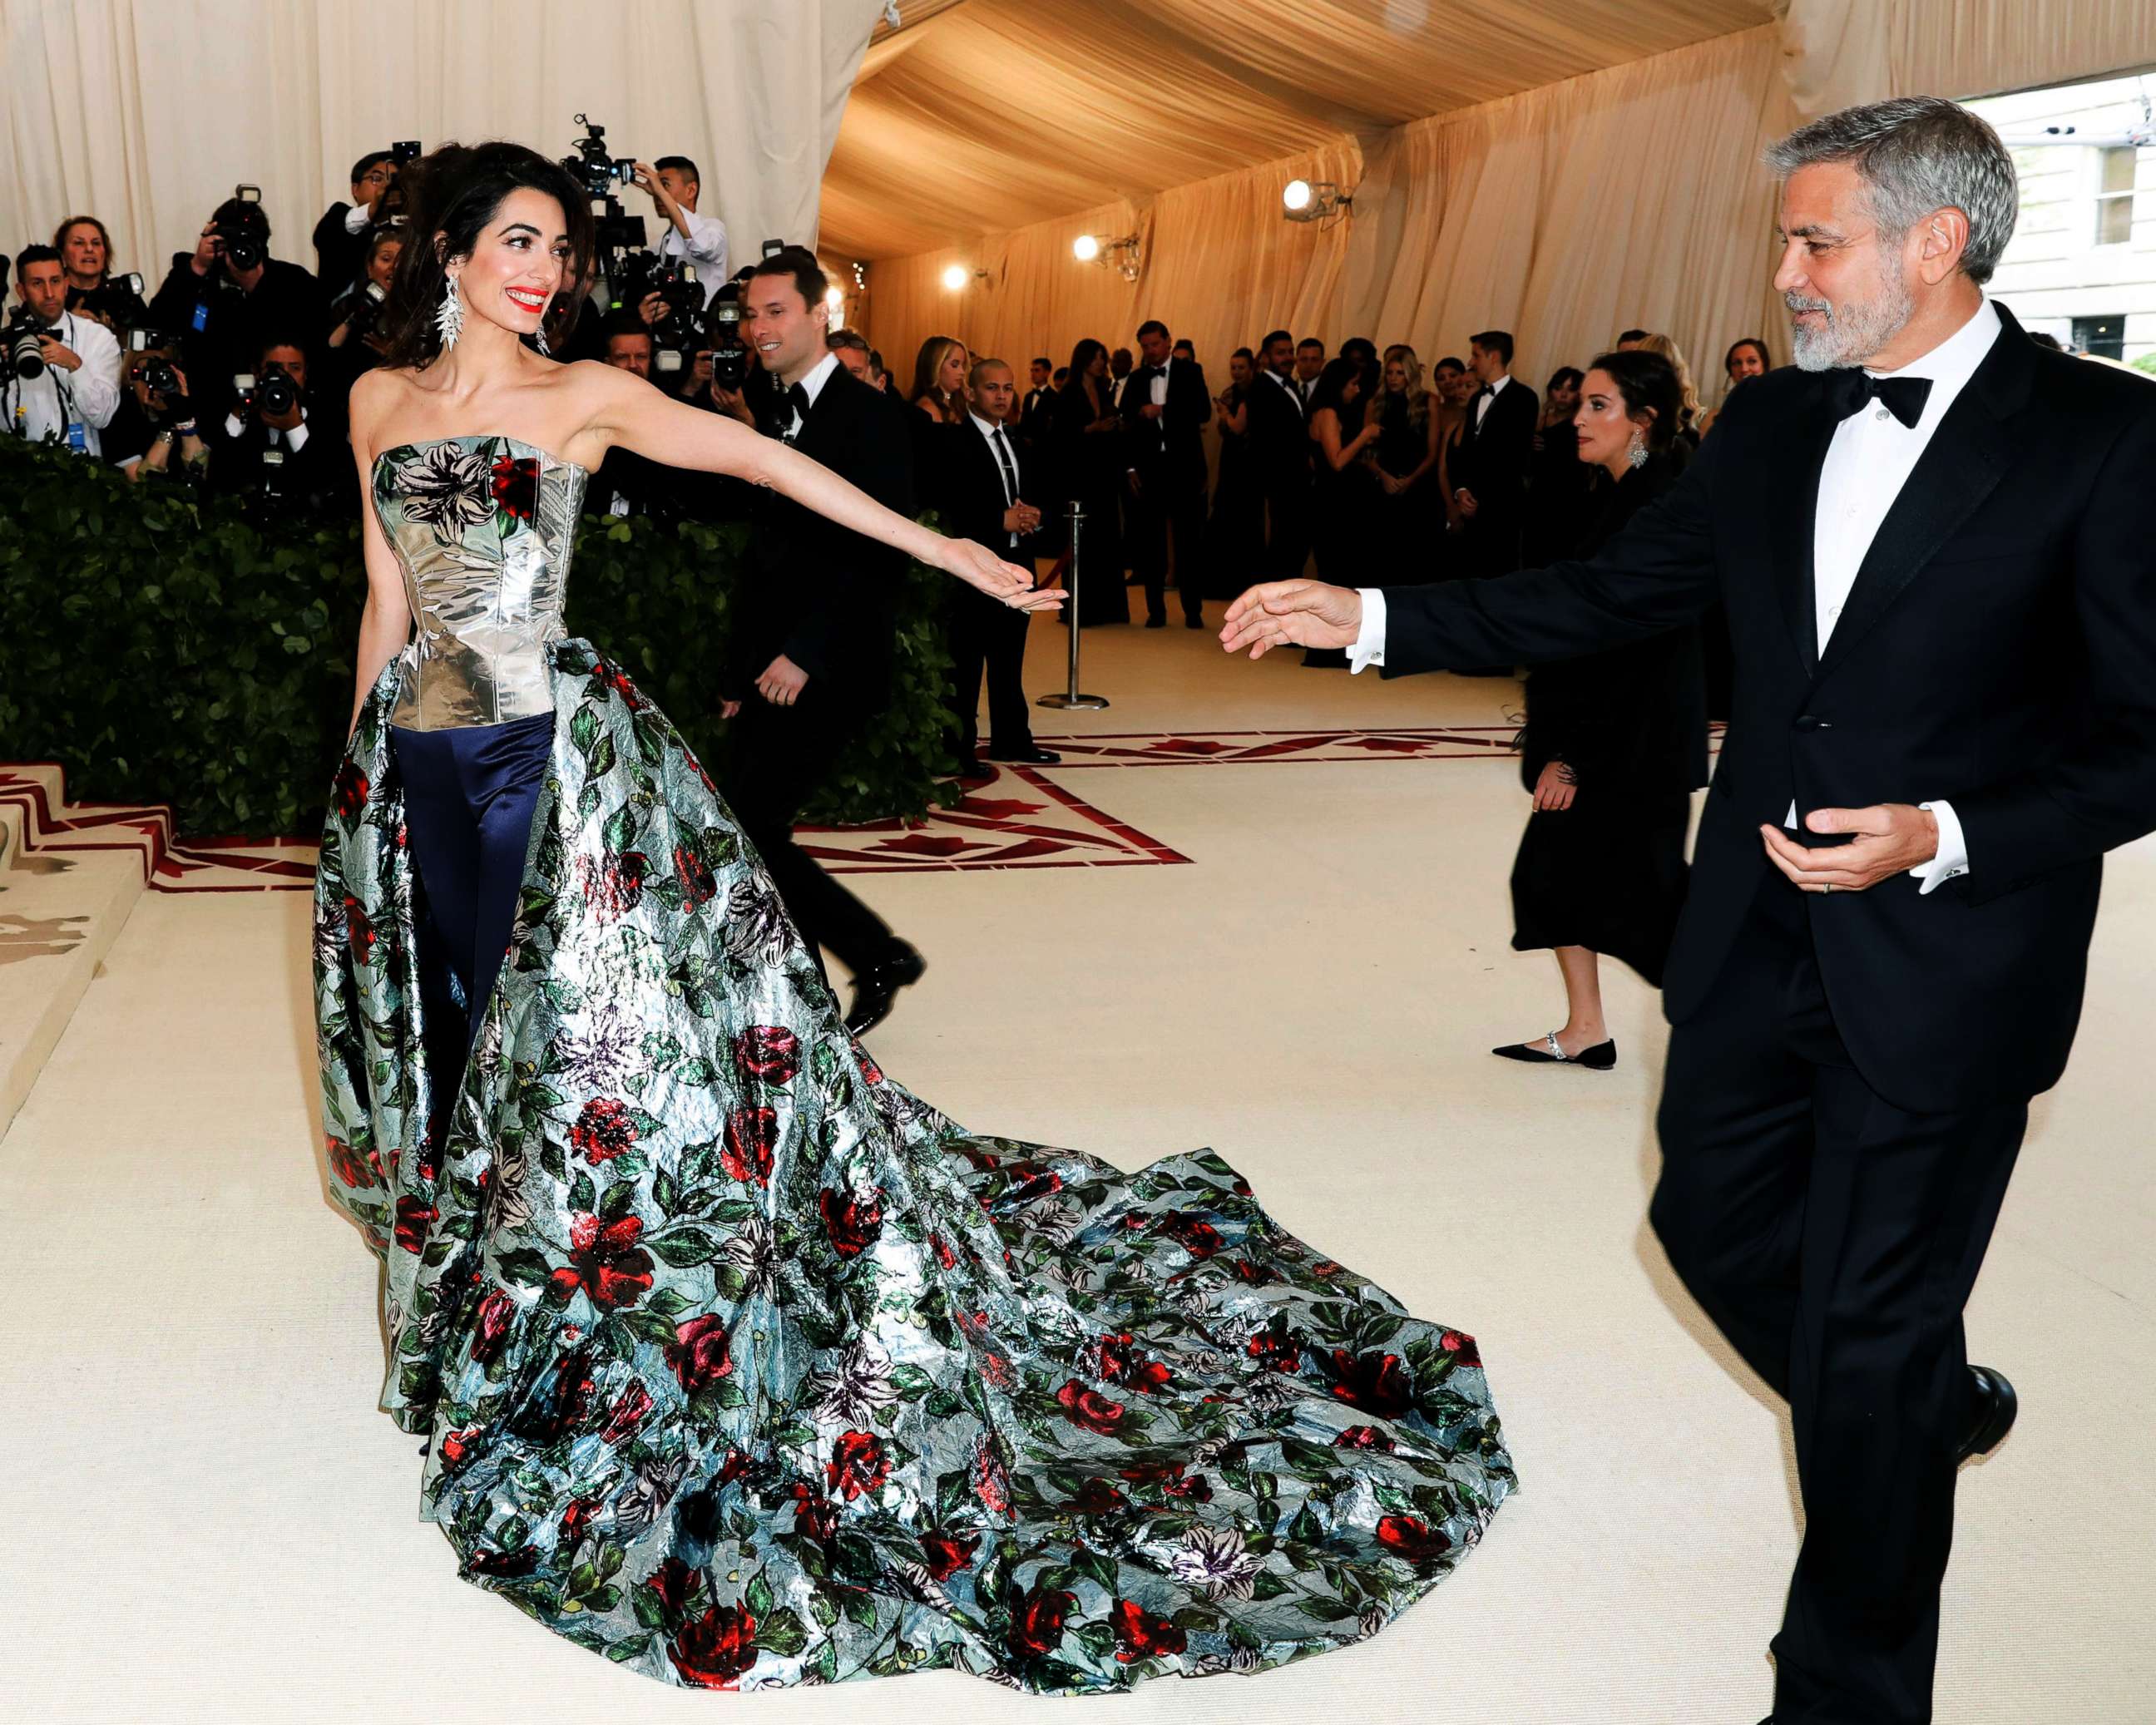 PHOTO: Amal Clooney and George Clooney arrive at The Metropolitan Museum of Art's Costume Institute Benefit celebrating the opening of Heavenly Bodies: Fashion and the Catholic Imagination, New York, May 7, 2018.